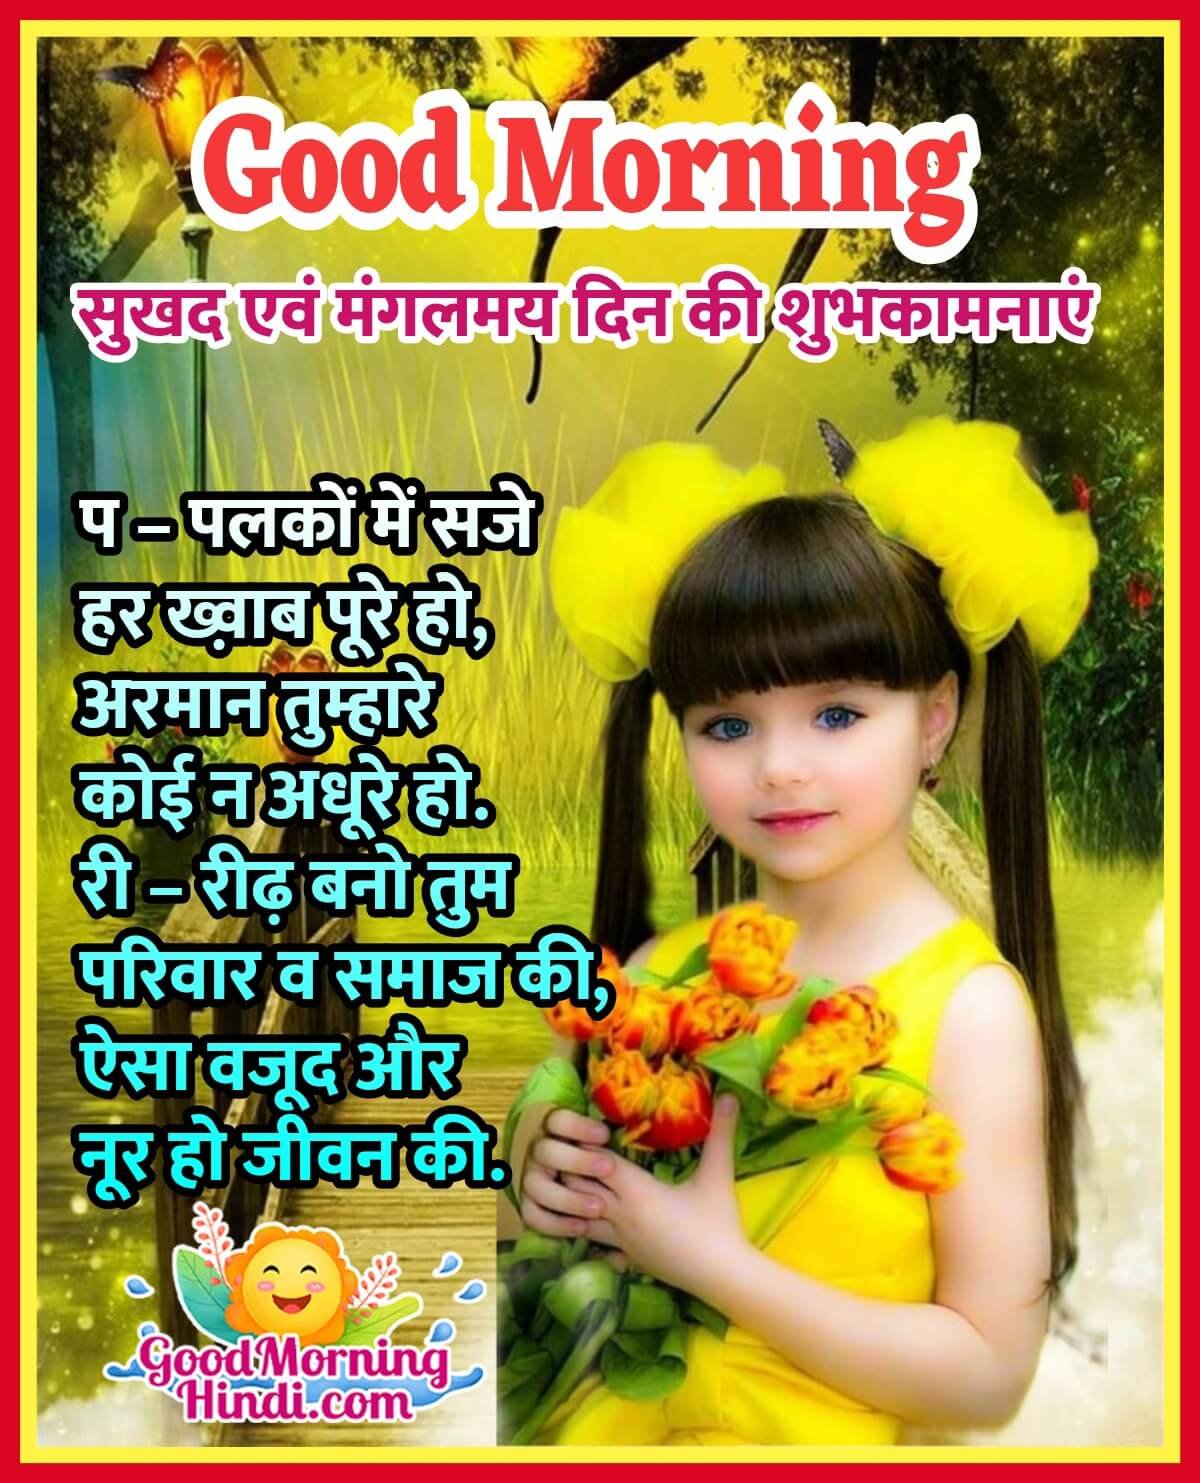 Good Morning Wishes Images in Hindi - Good Morning Wishes & Images ...